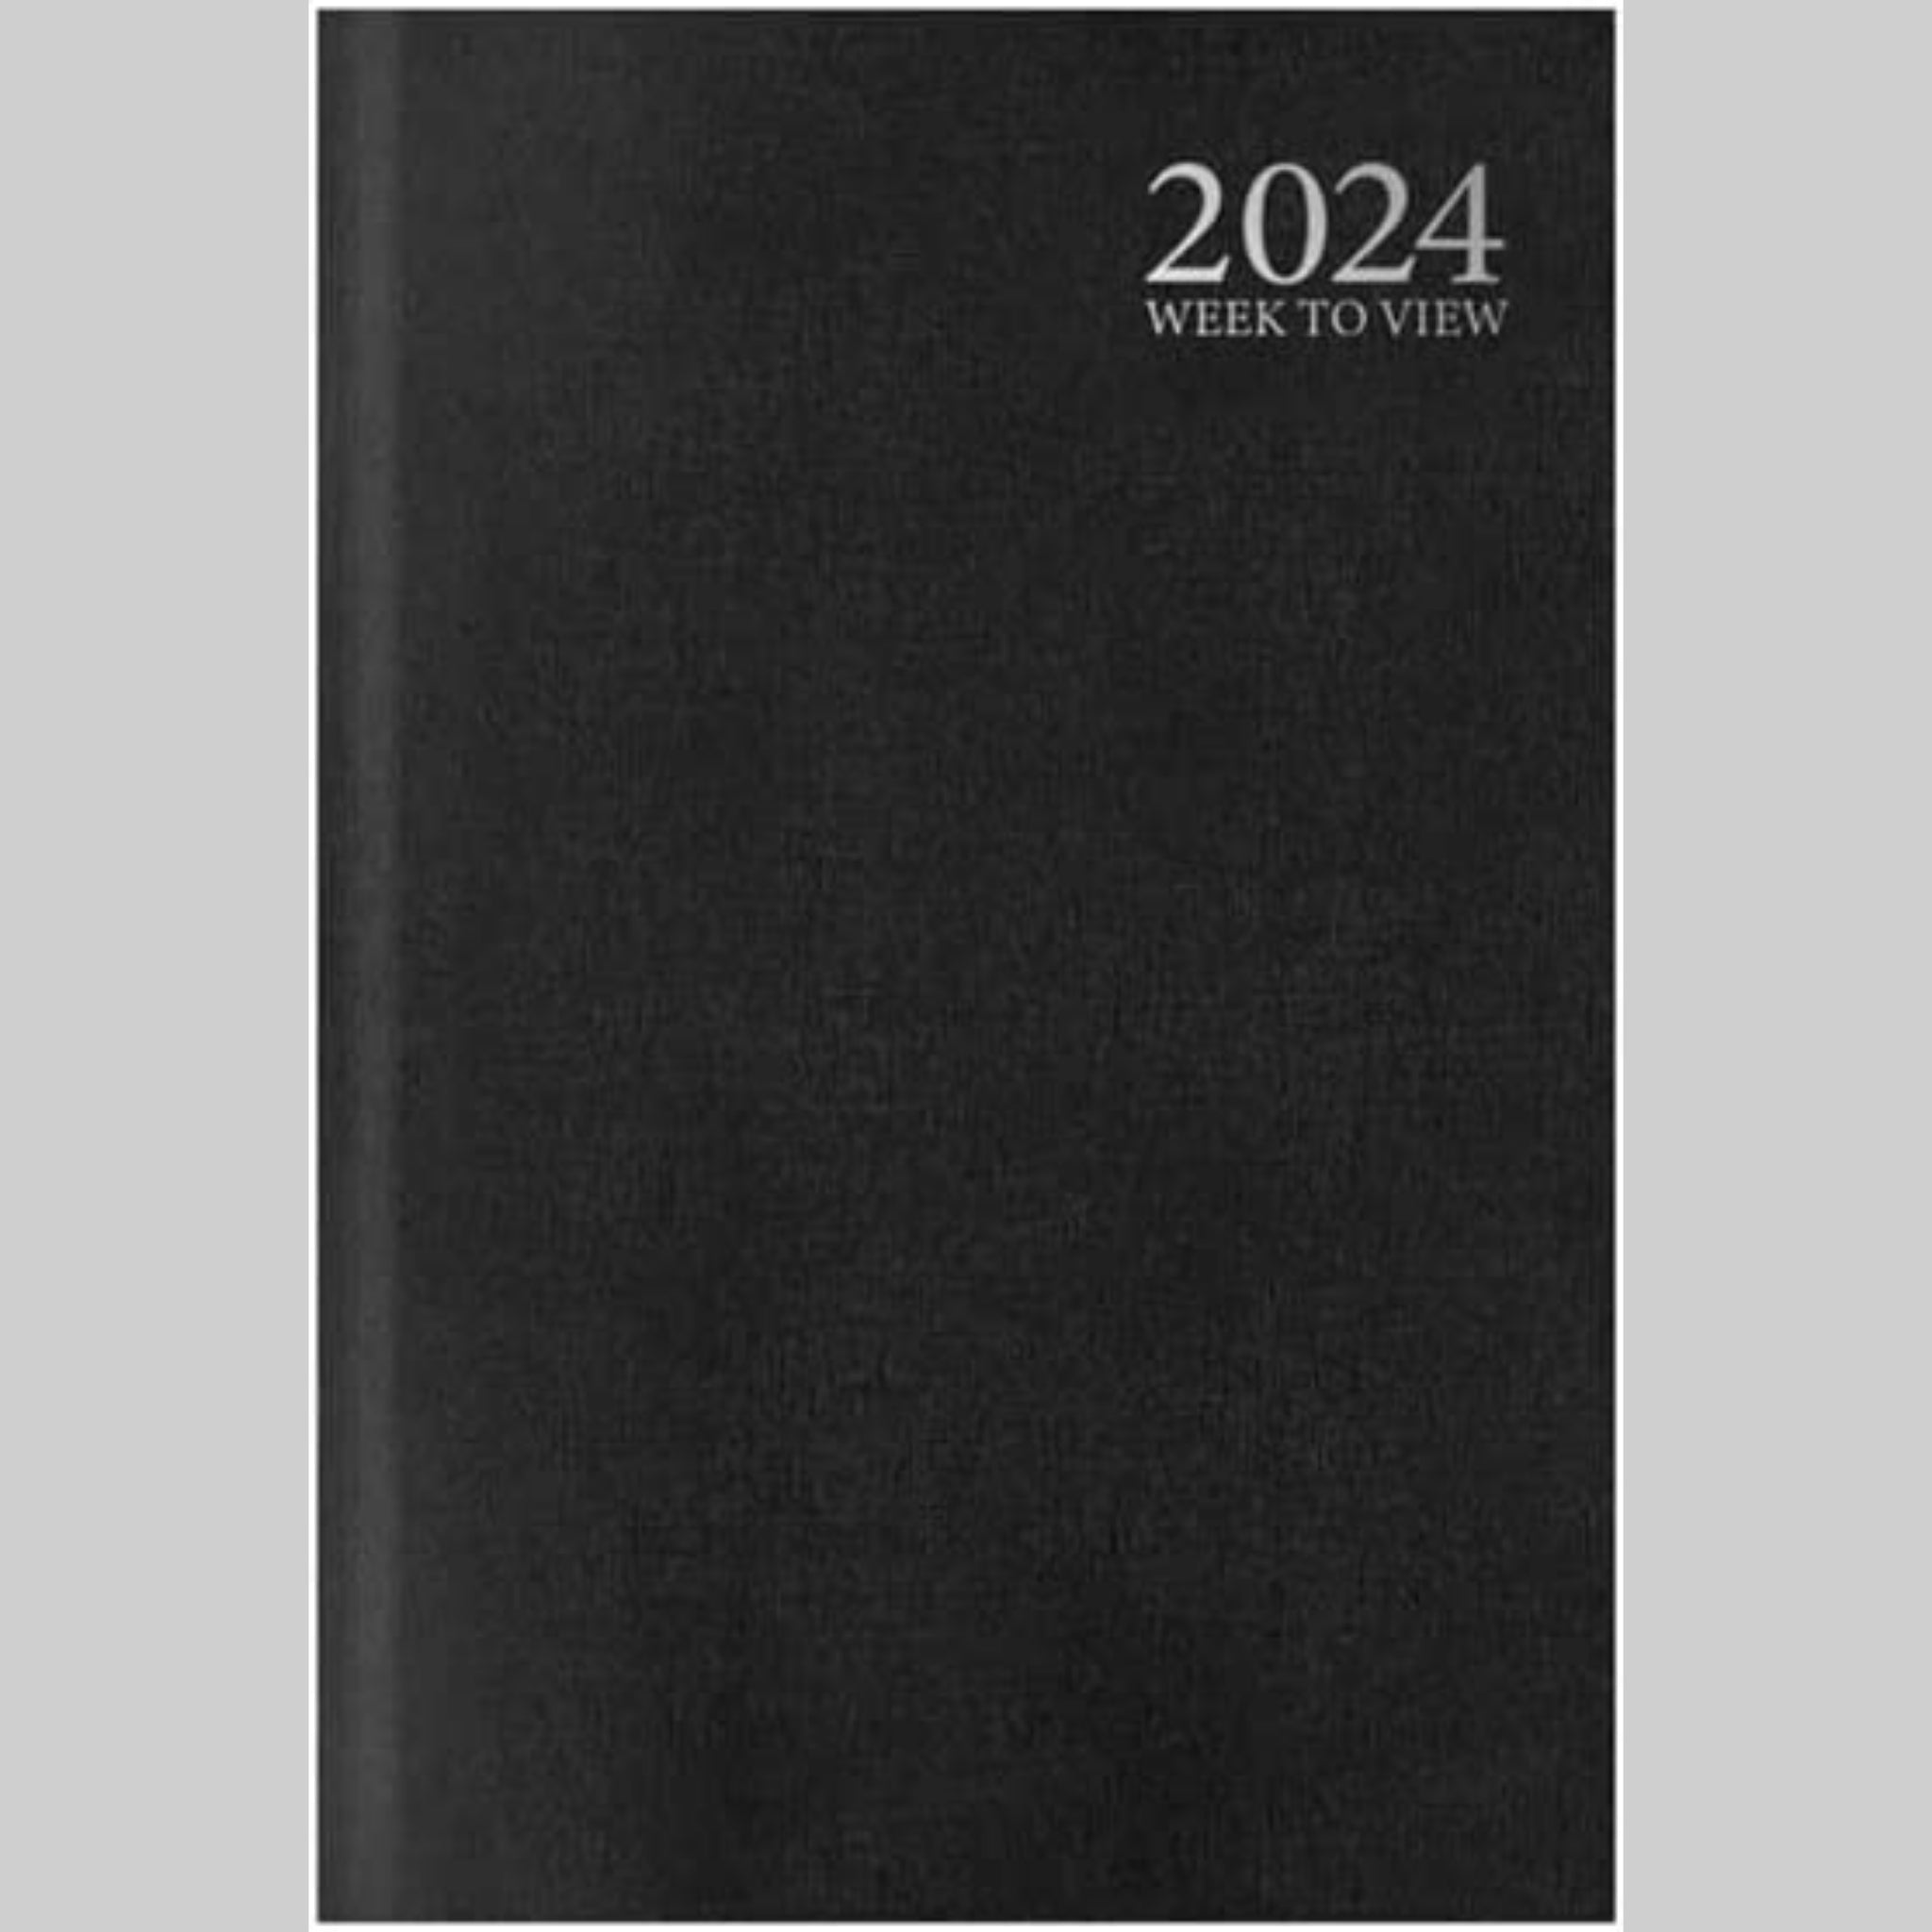 Beclen Harp 2024 Week To View/WTV Personal Slim/Pocket Diary With Luxury Fashion Cover